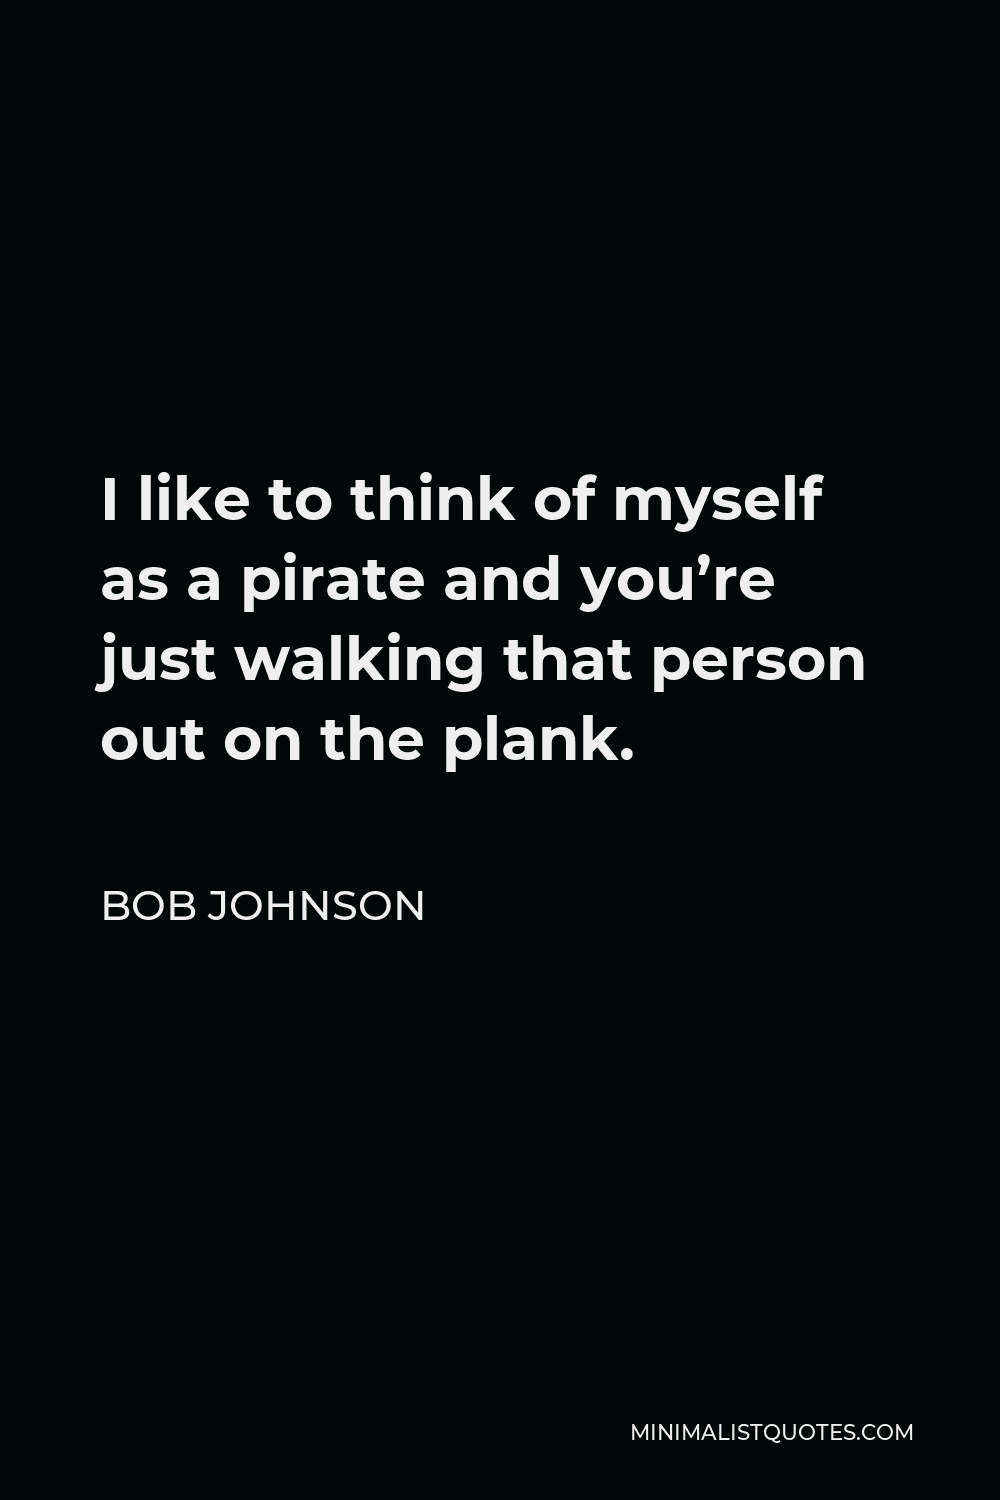 Bob Johnson Quote - I like to think of myself as a pirate and you’re just walking that person out on the plank.